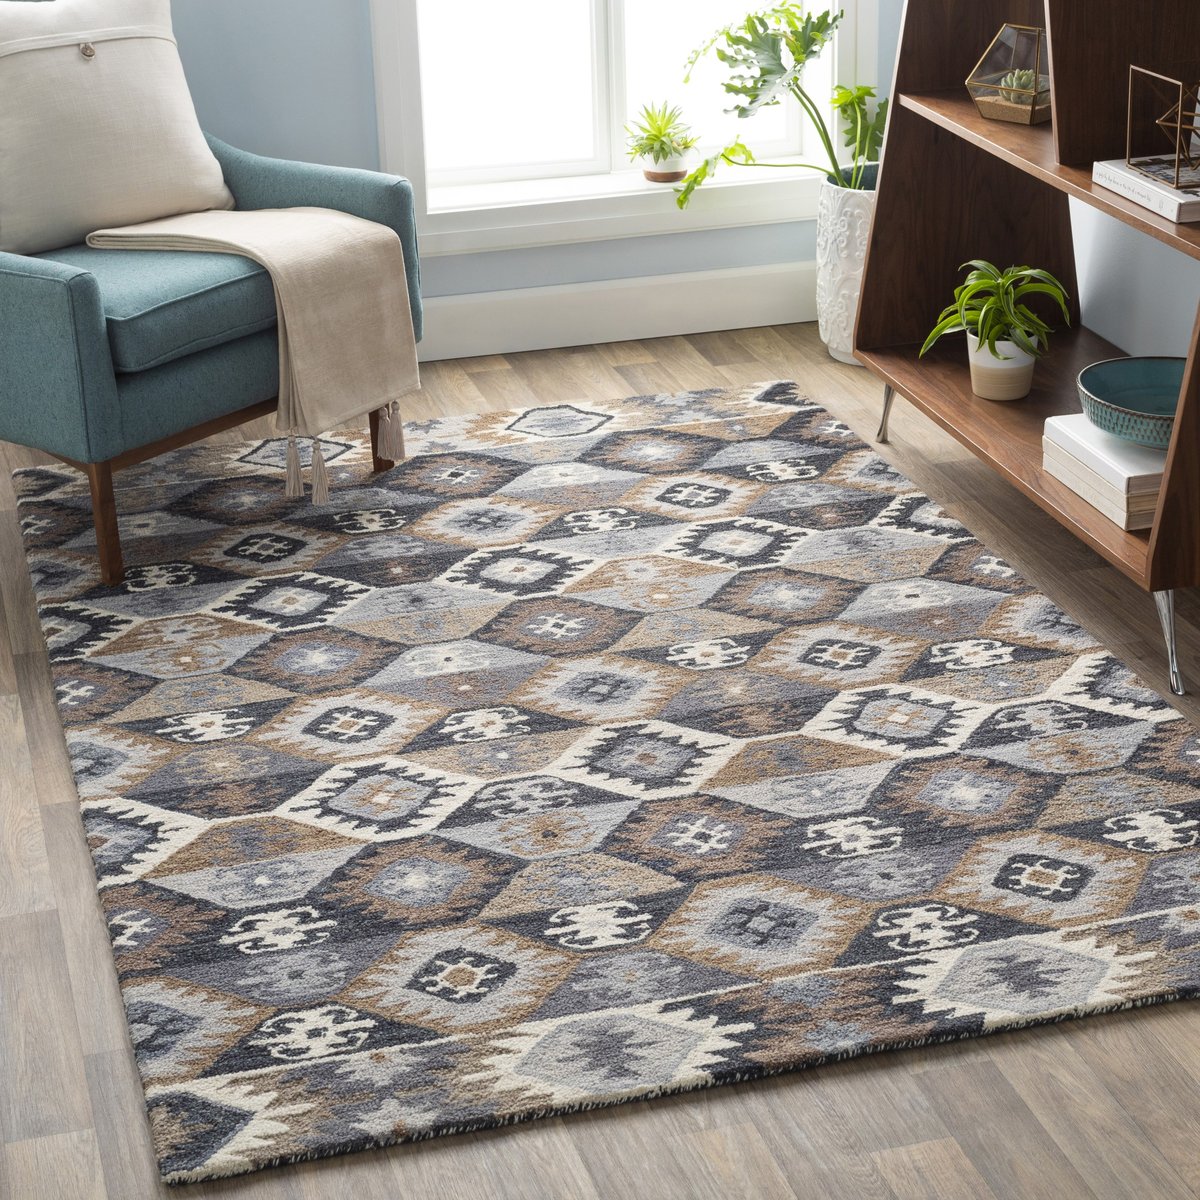 Surya Dena 21784 Rugs Direct, Grey And Brown Area Rugs